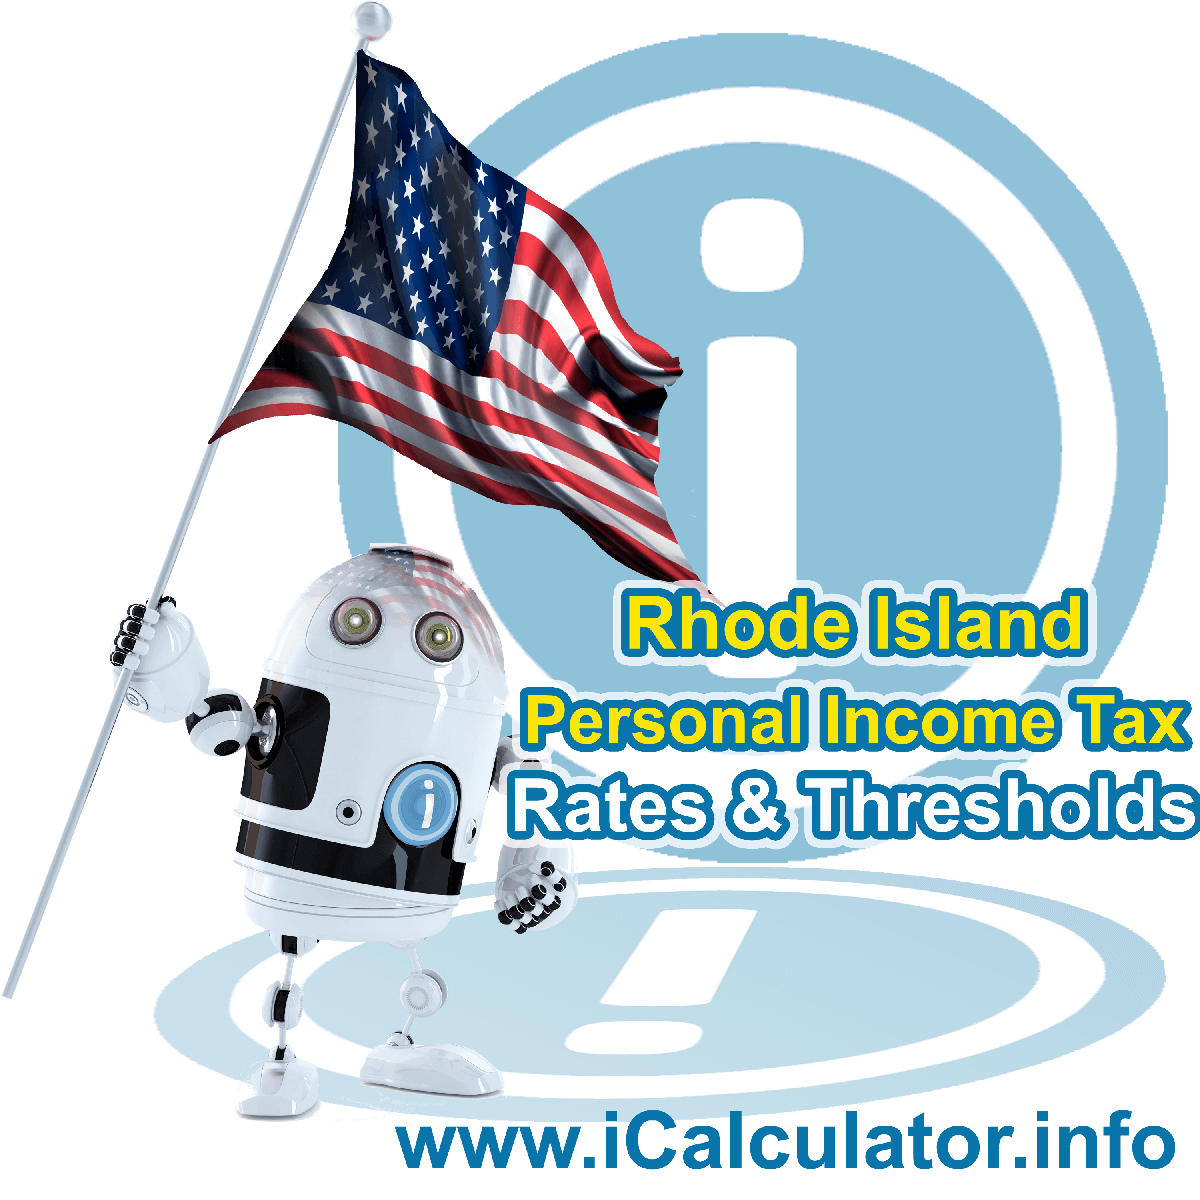 Rhode Island State Tax Tables 2023. This image displays details of the Rhode Island State Tax Tables for the 2023 tax return year which is provided in support of the 2023 US Tax Calculator